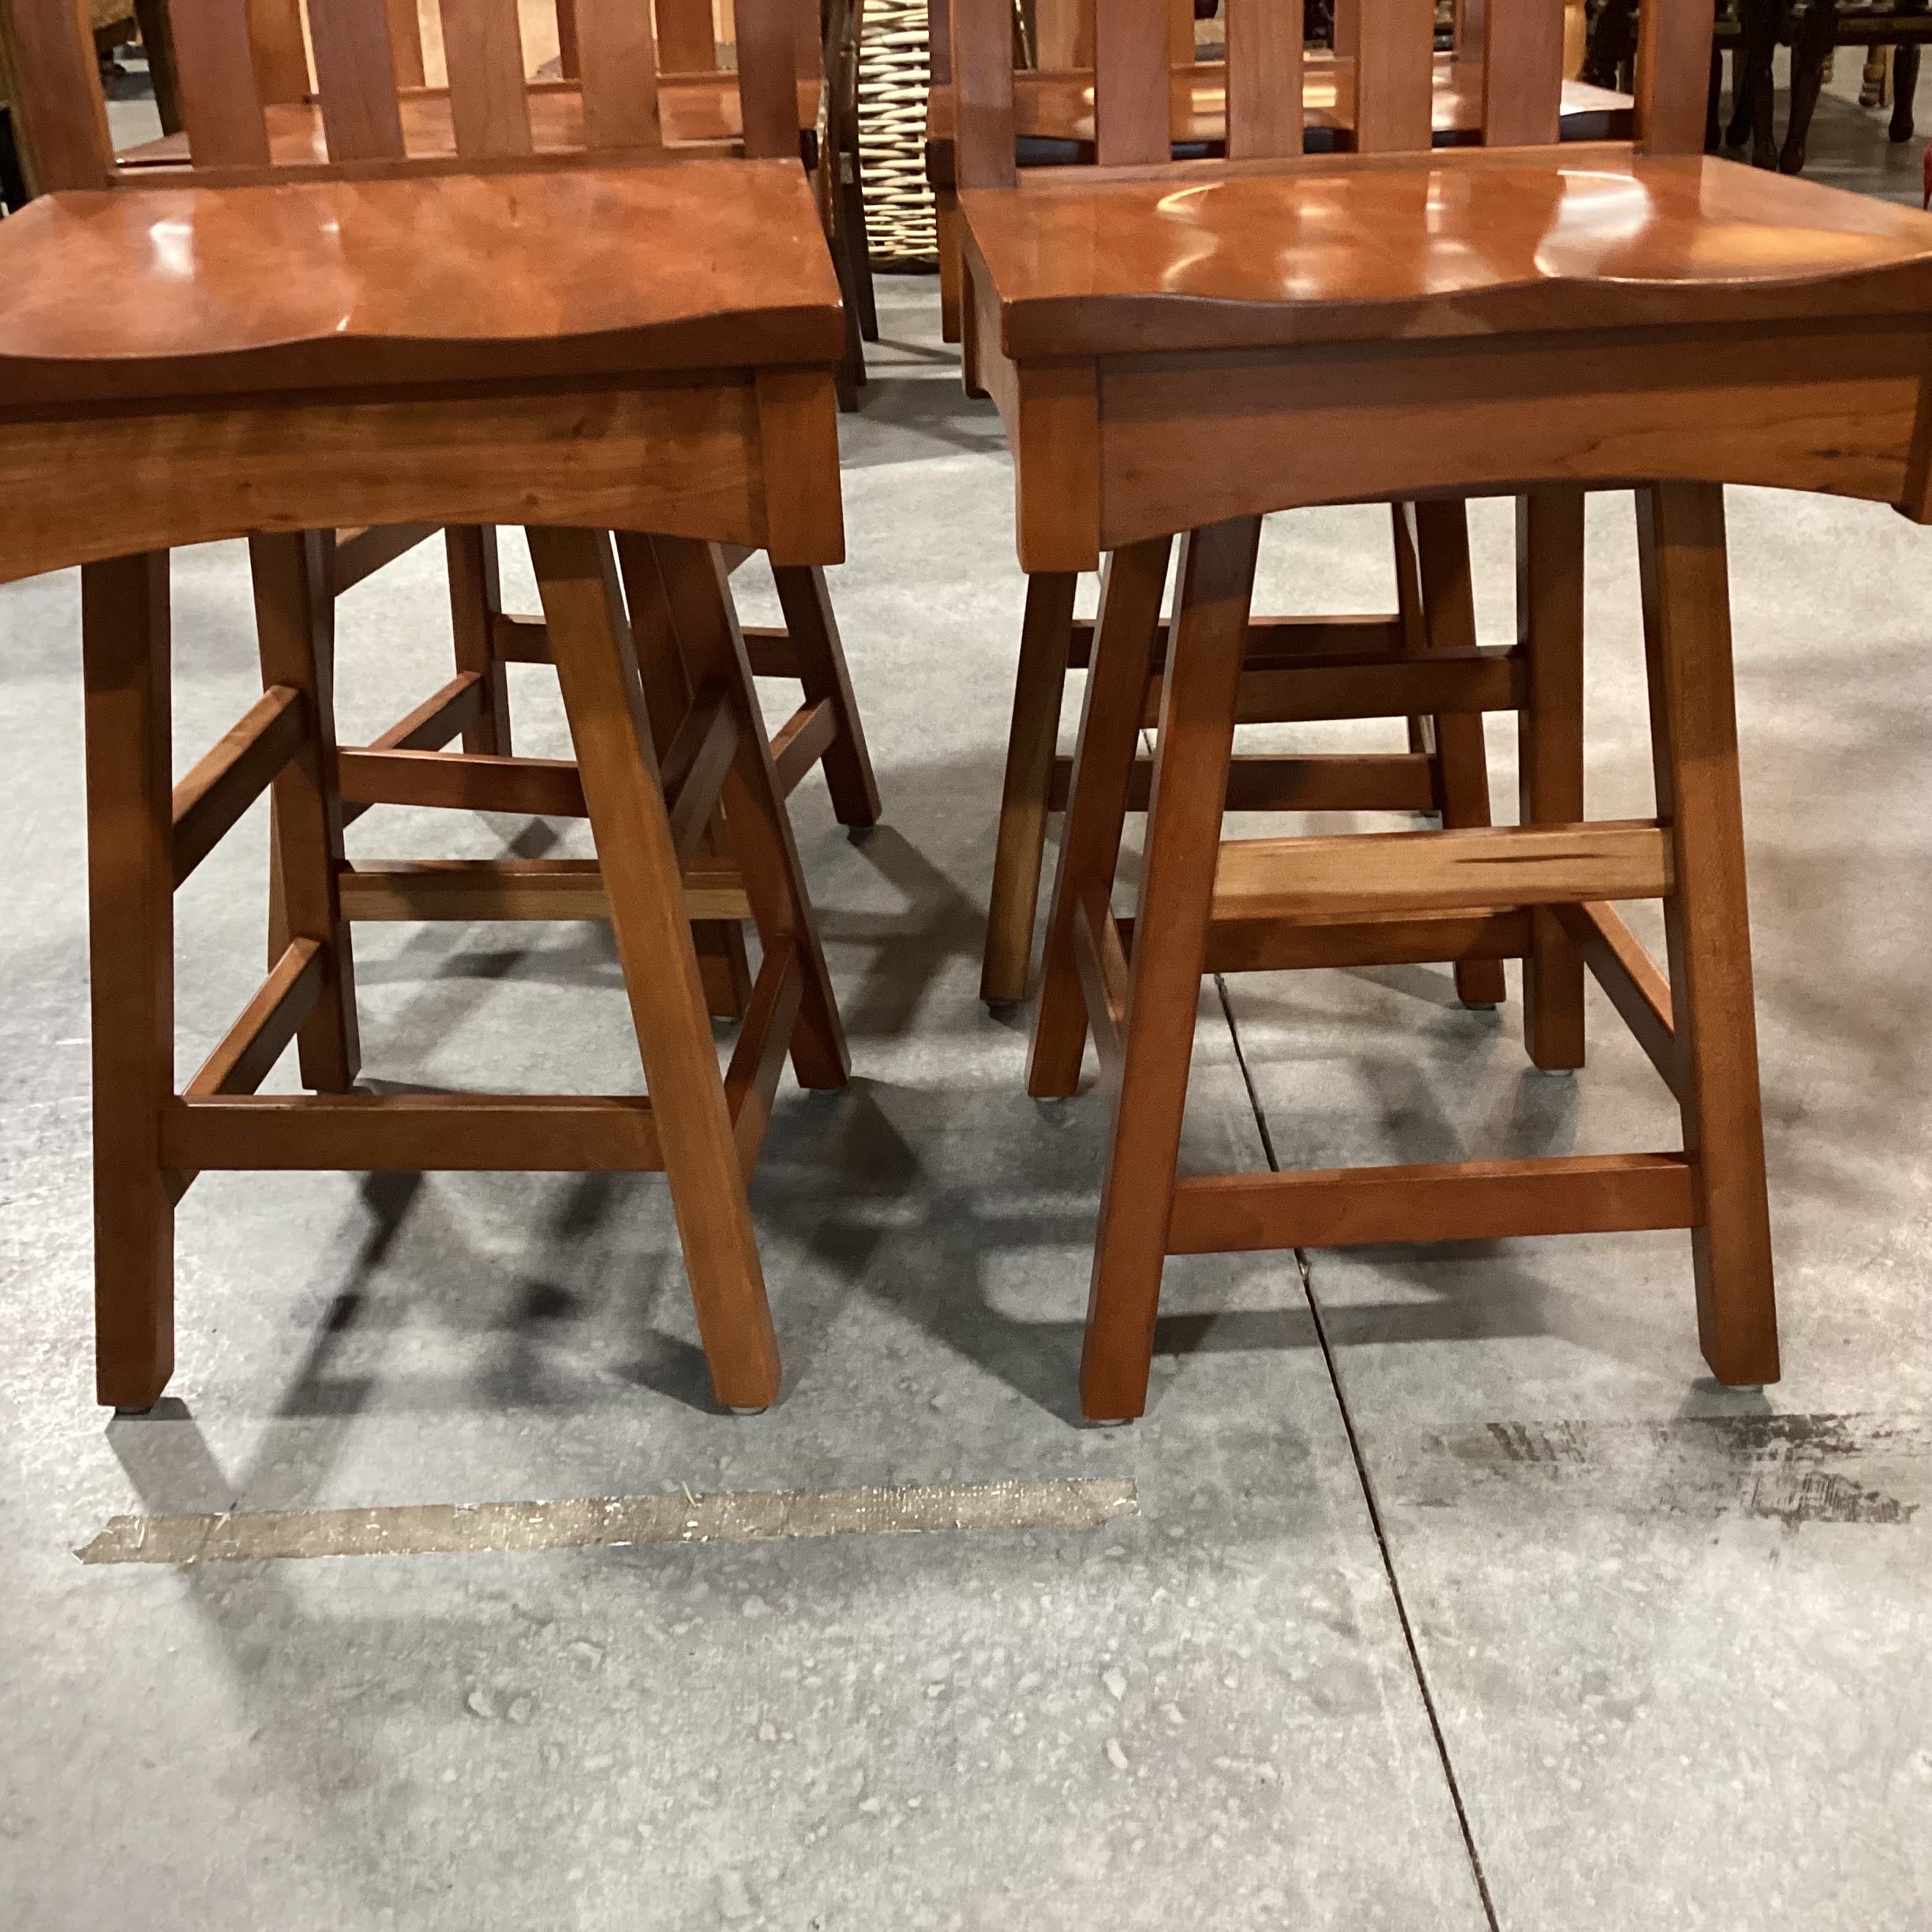 Set of 4 Hand Crafted Solid Cherry Swivel Barstools